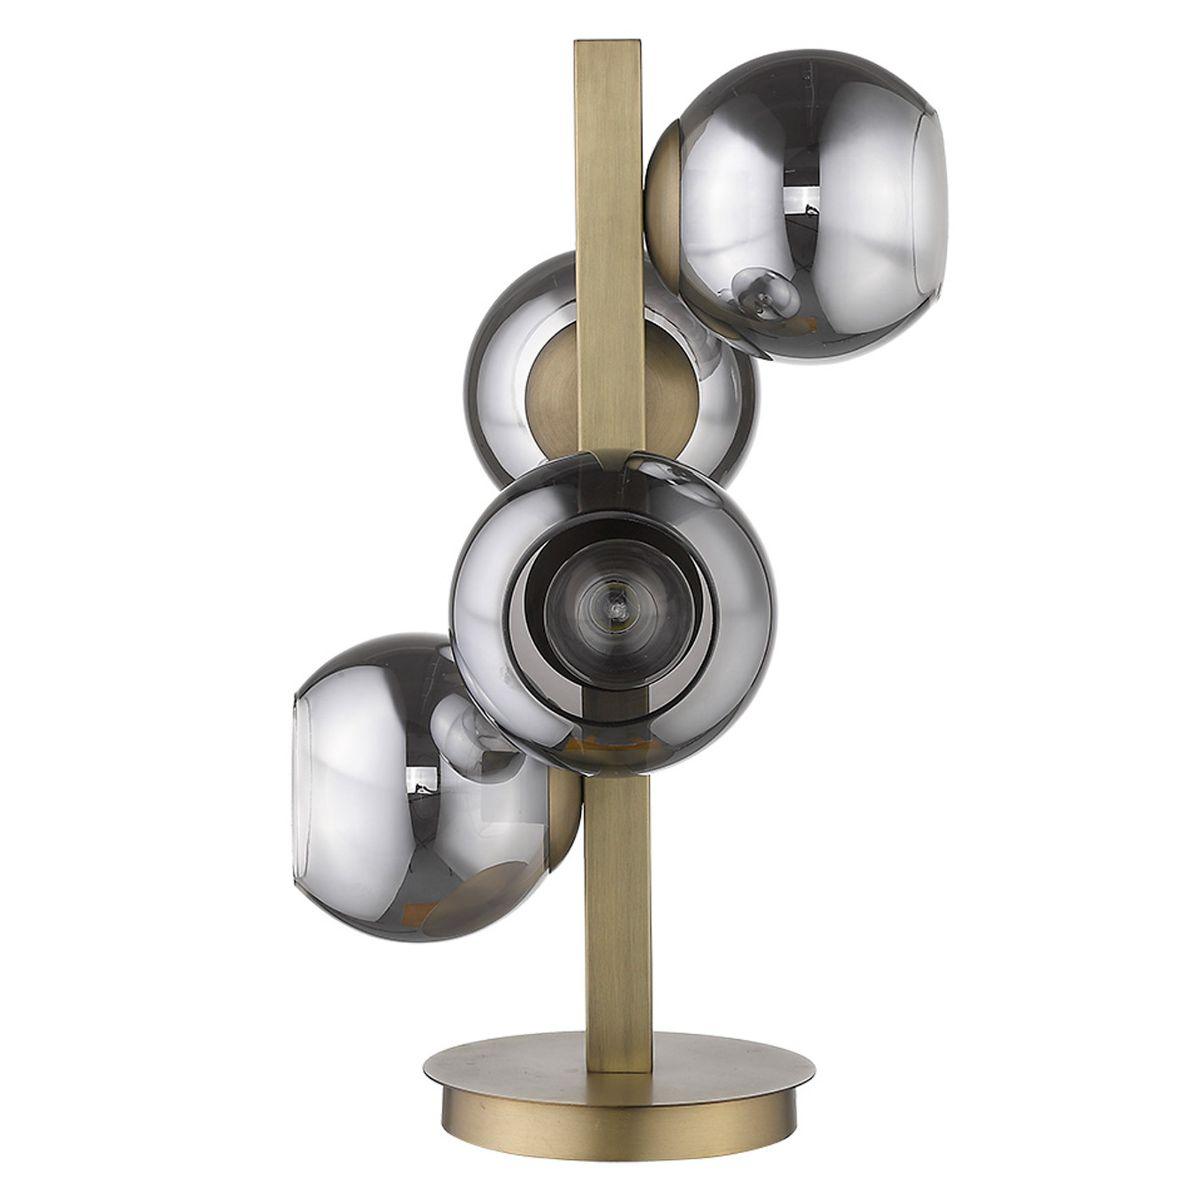 Lunette 4 Lights Table Lamp Smoke Glass with Aged Brass Finish